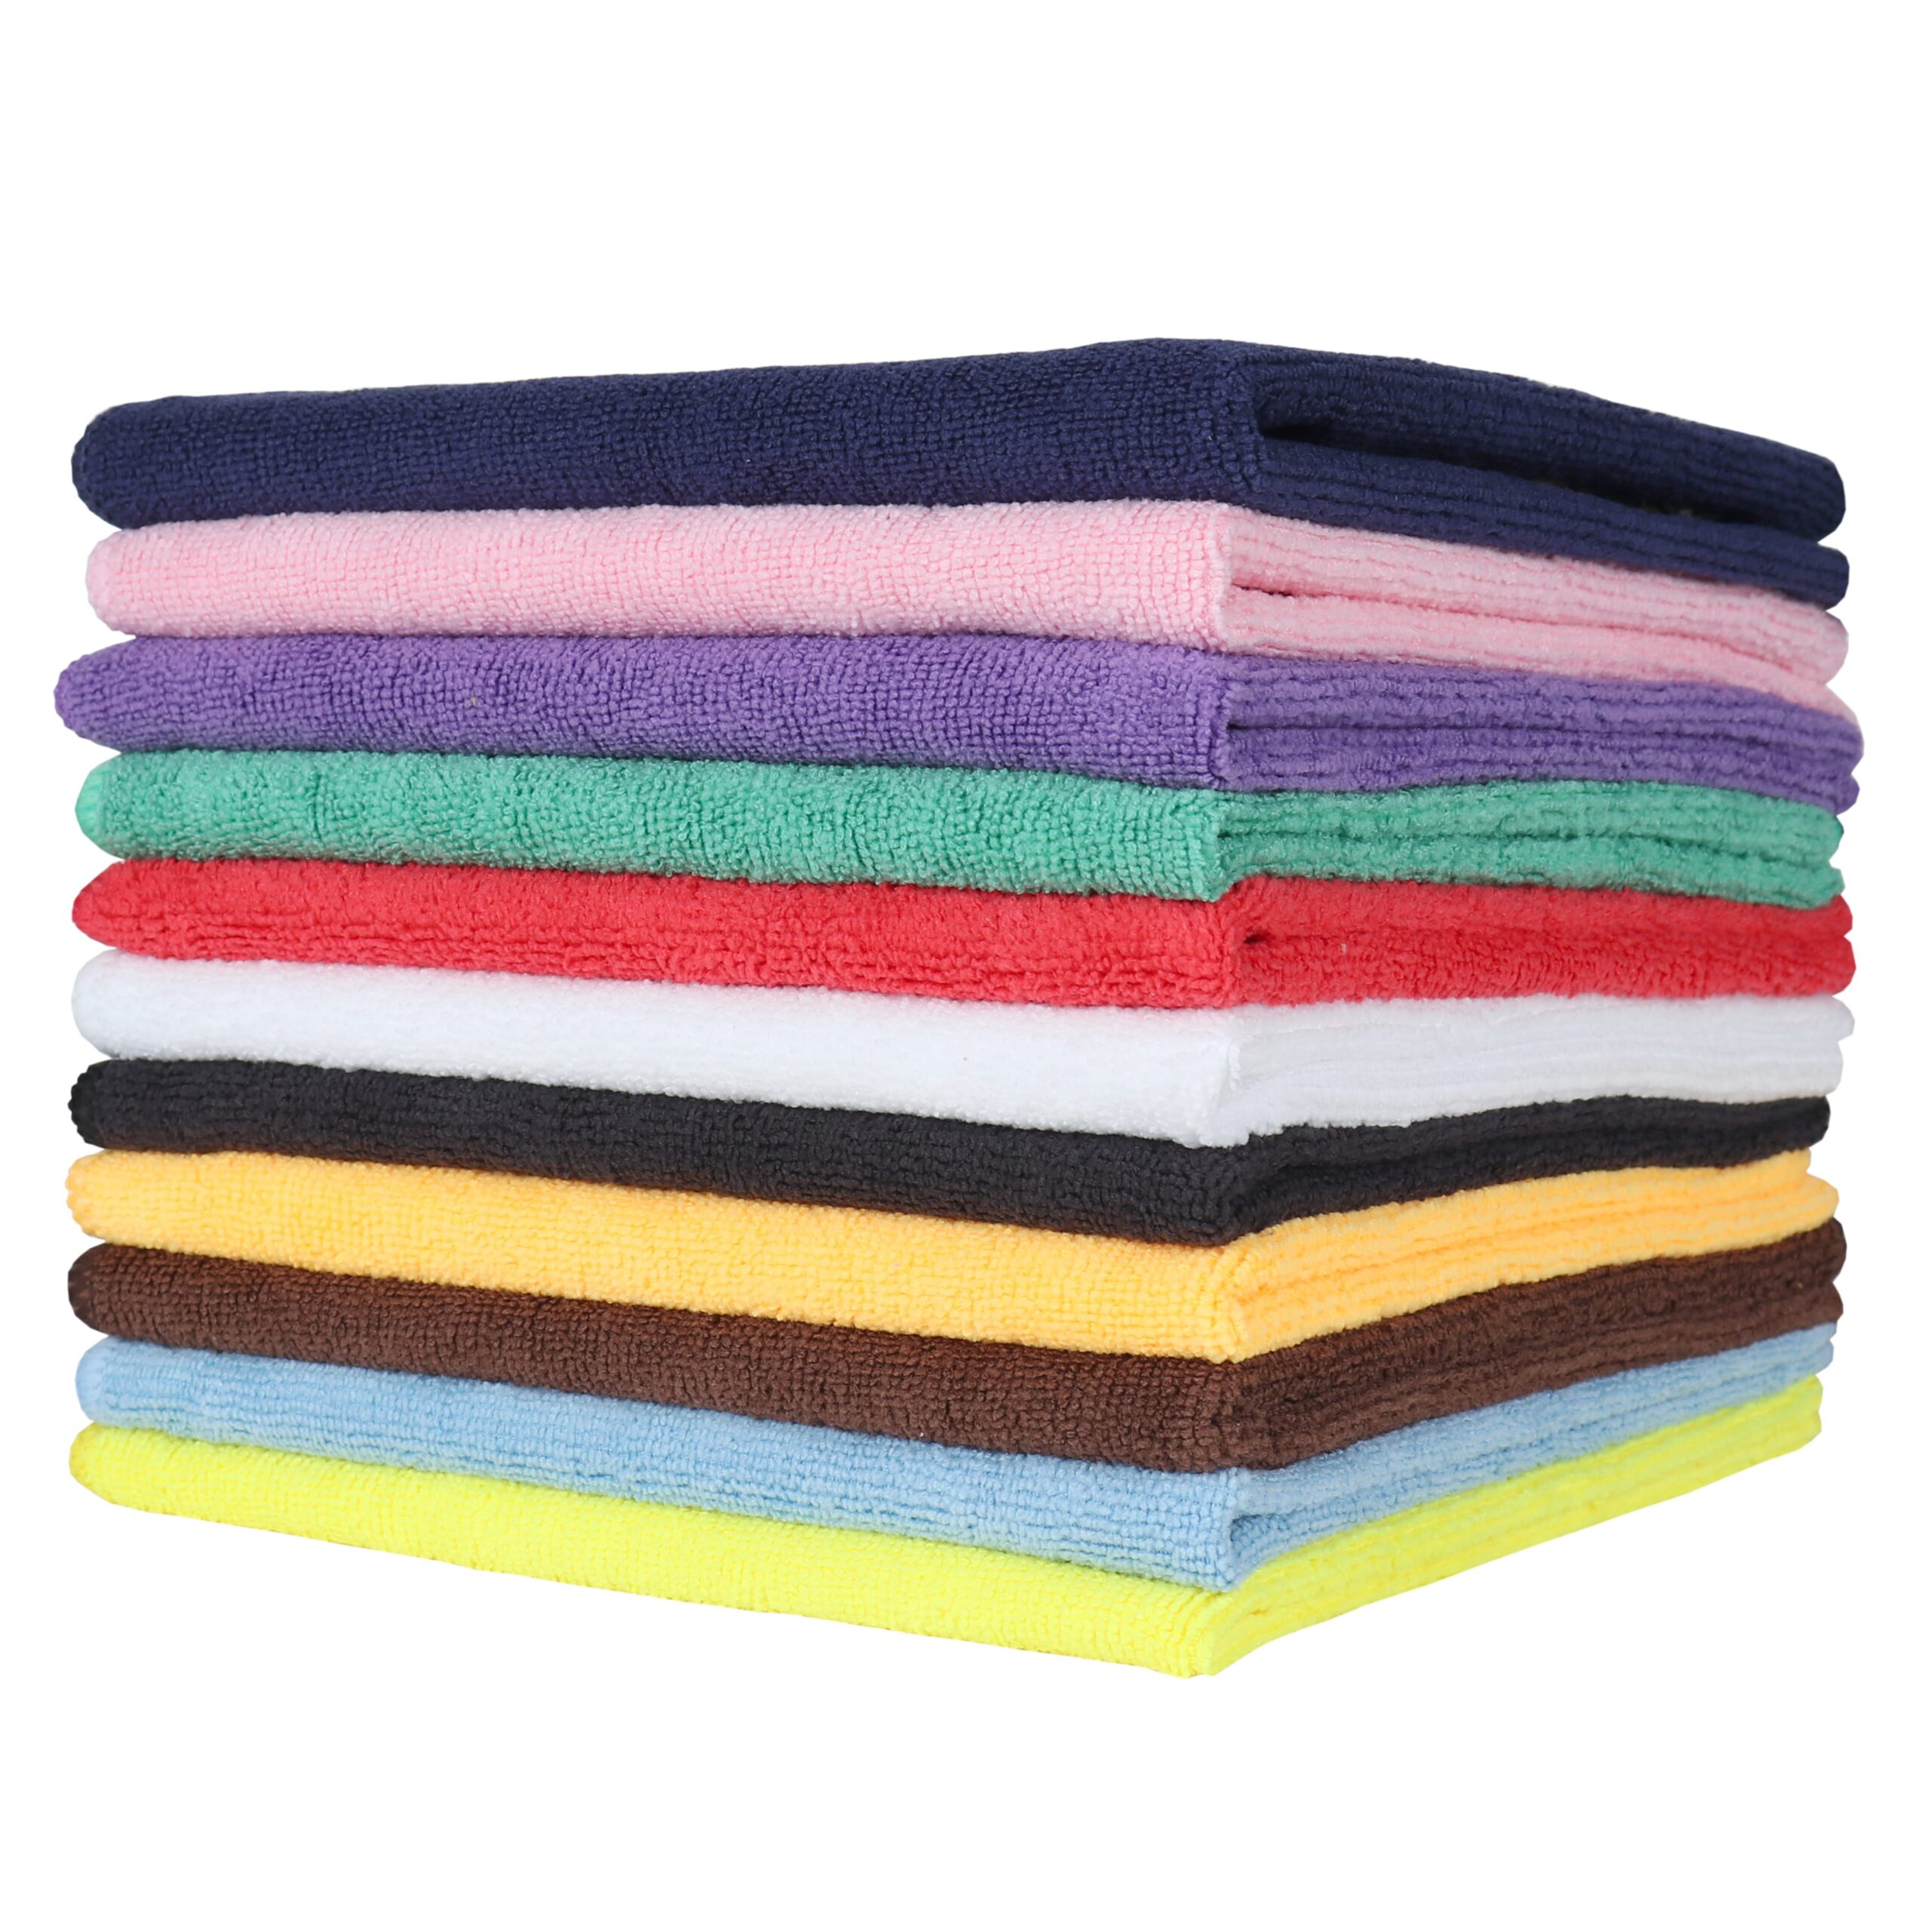 WASH RAGS FOR BATHING. MULTI COLOR WASH CLOTHS RAGS TOWEL 20 in a pack